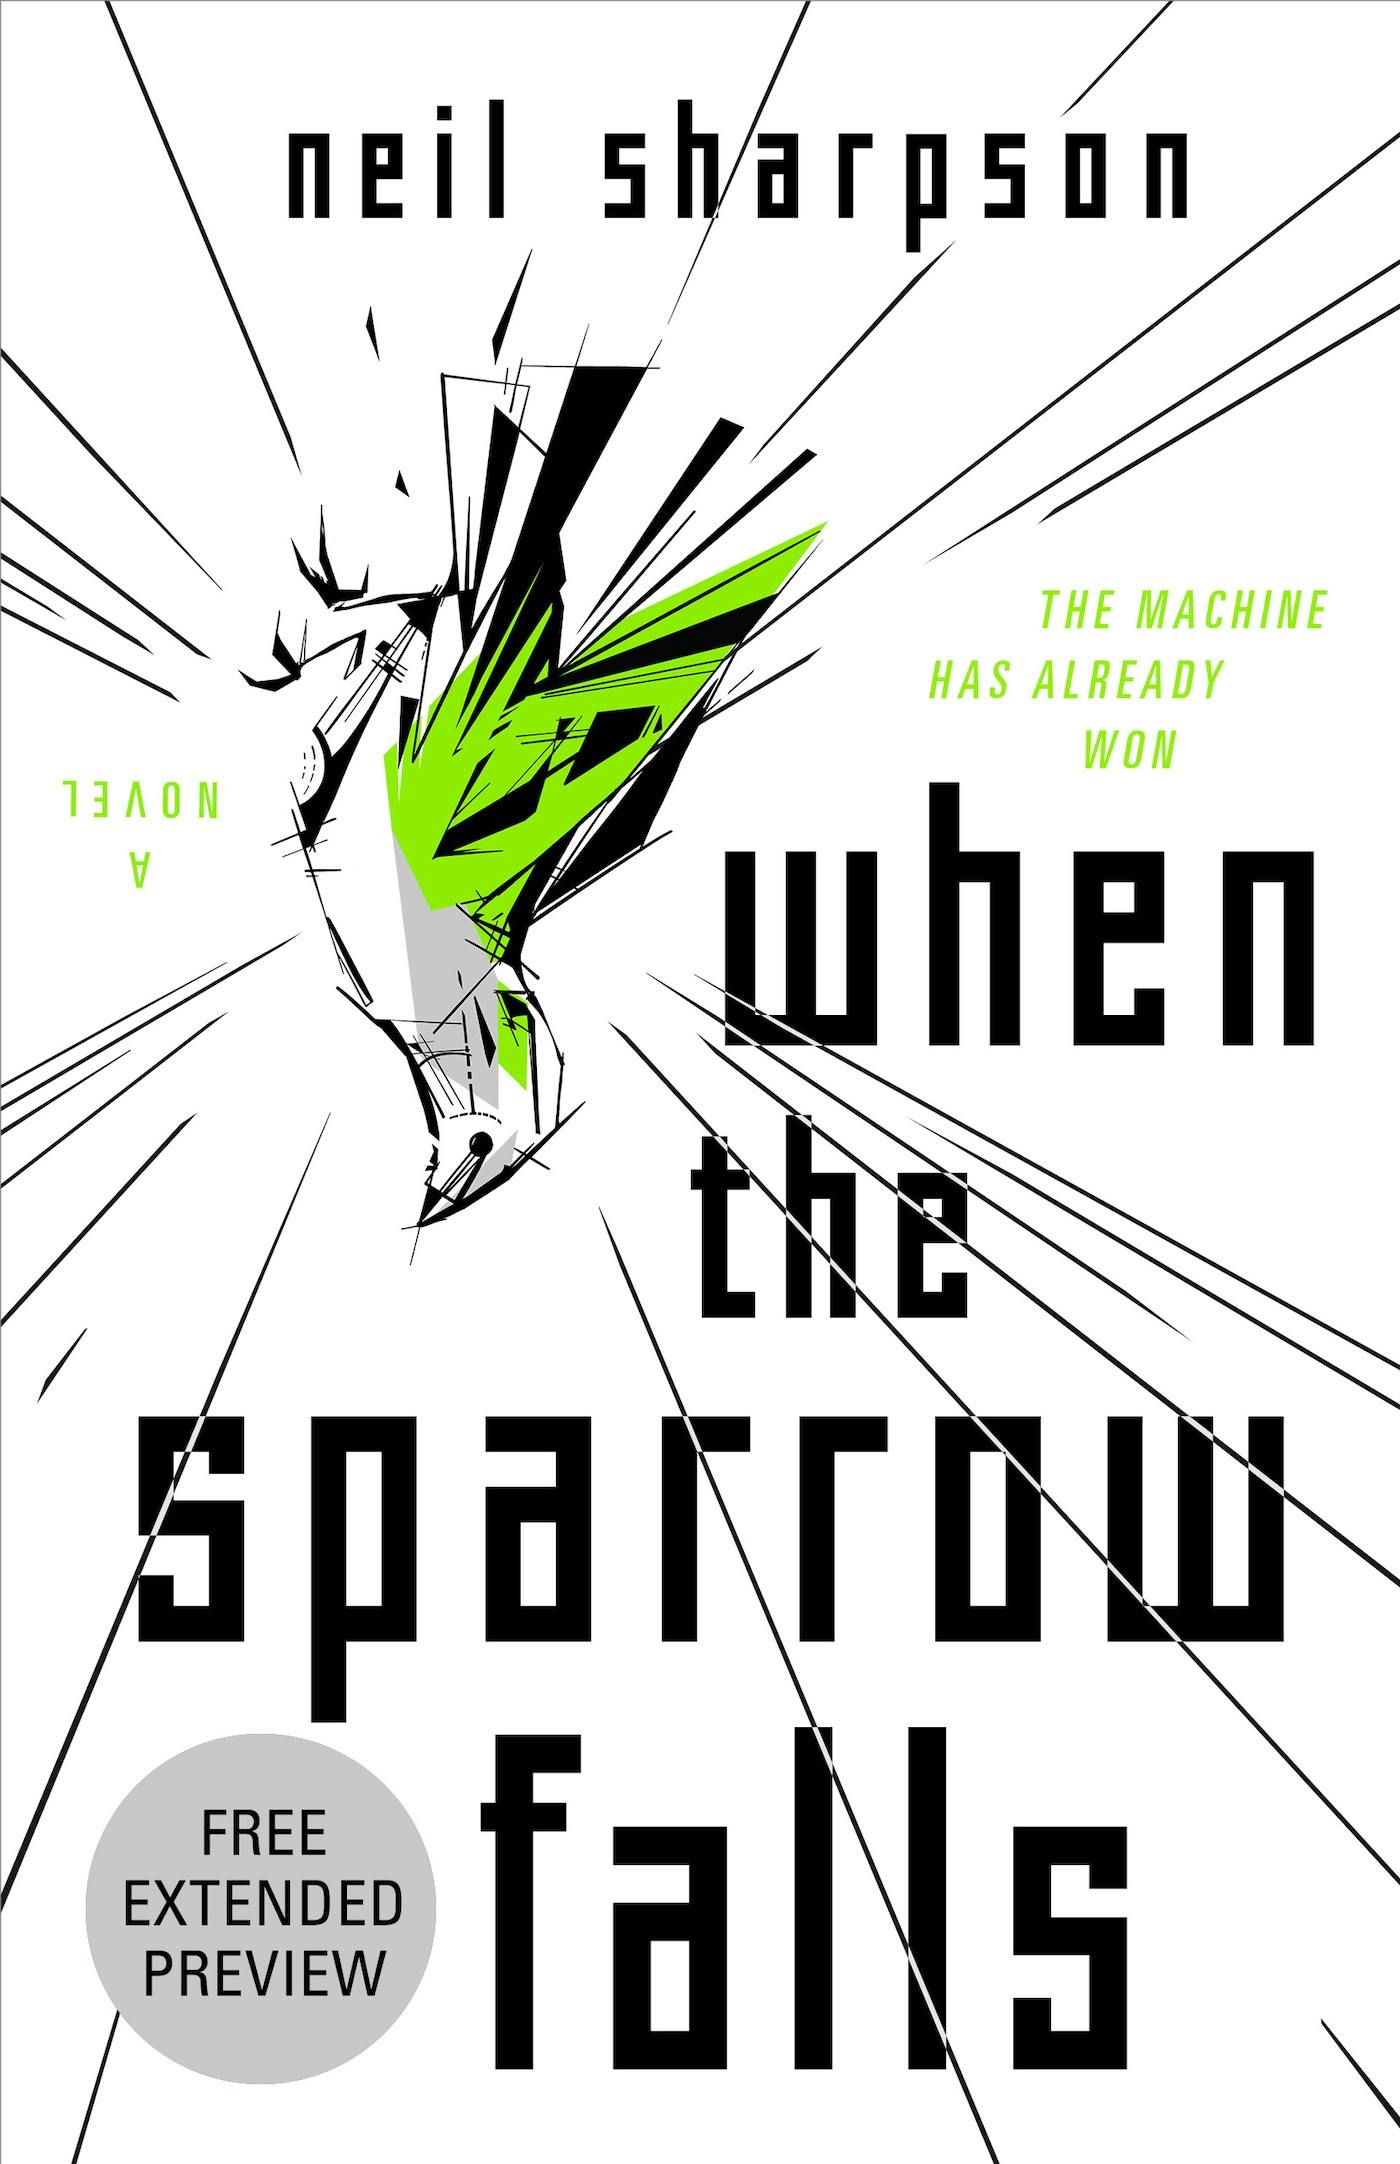 Cover for the book titled as: When the Sparrow Falls Sneak Peek